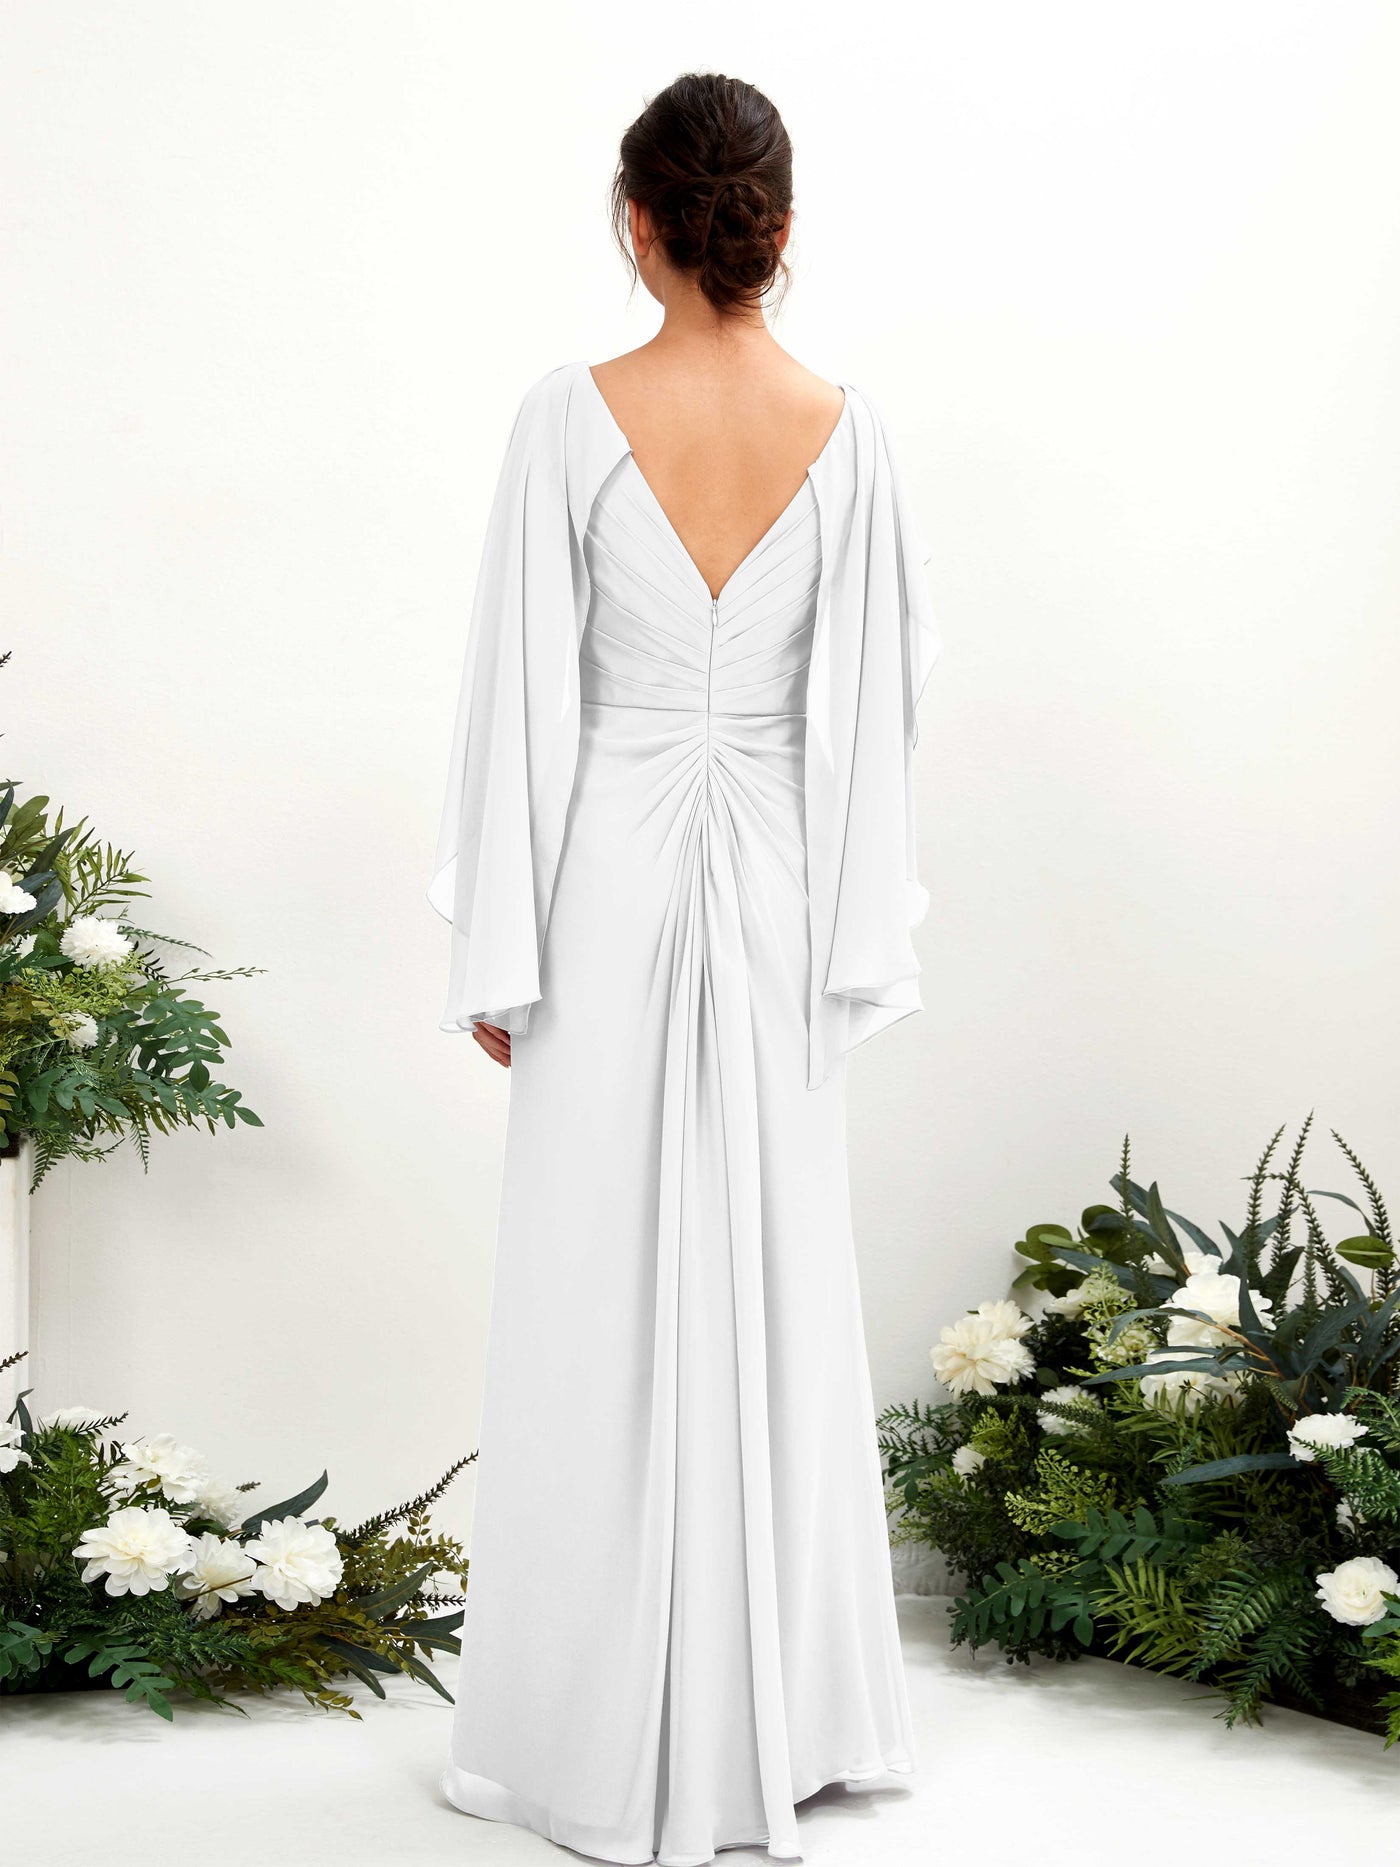 White Bridesmaid Dresses Bridesmaid Dress A-line Chiffon Straps Full Length Long Sleeves Wedding Party Dress (80220142)#color_white